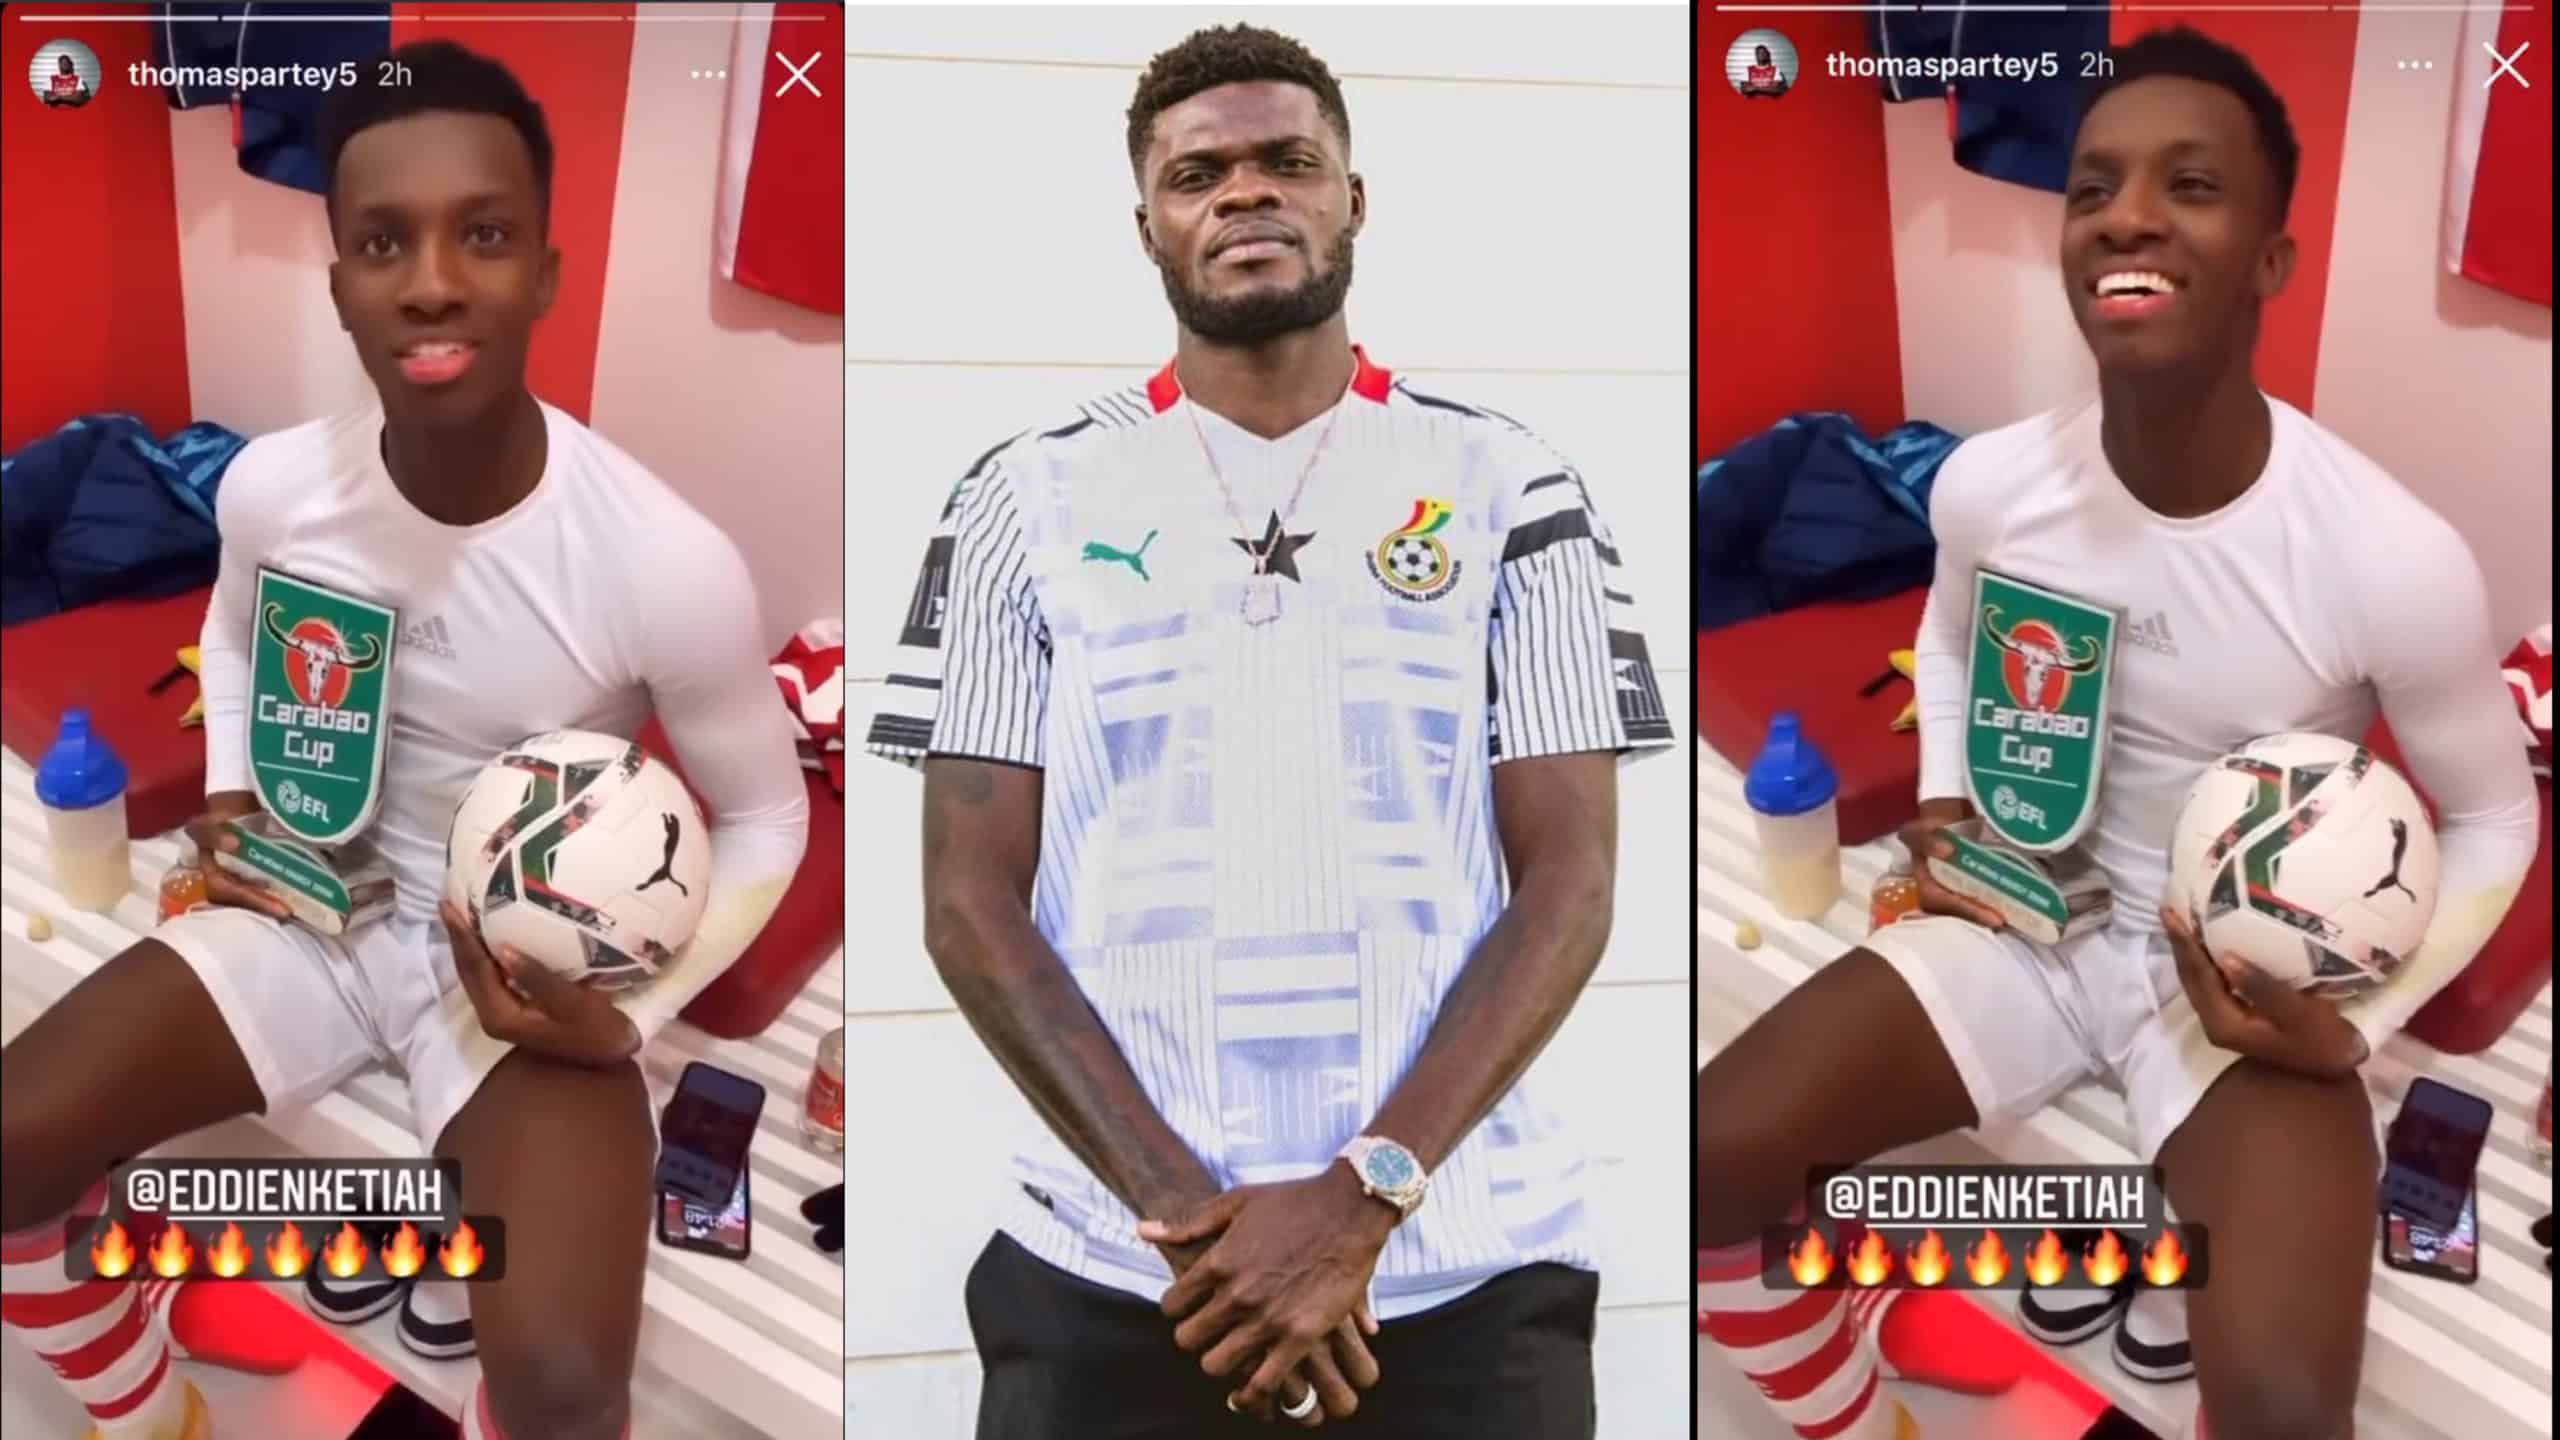 "You're ready for Ghana" – Thomas Partey convinces Arsenal teammate Eddie Nketiah to play for Black Stars [Video]